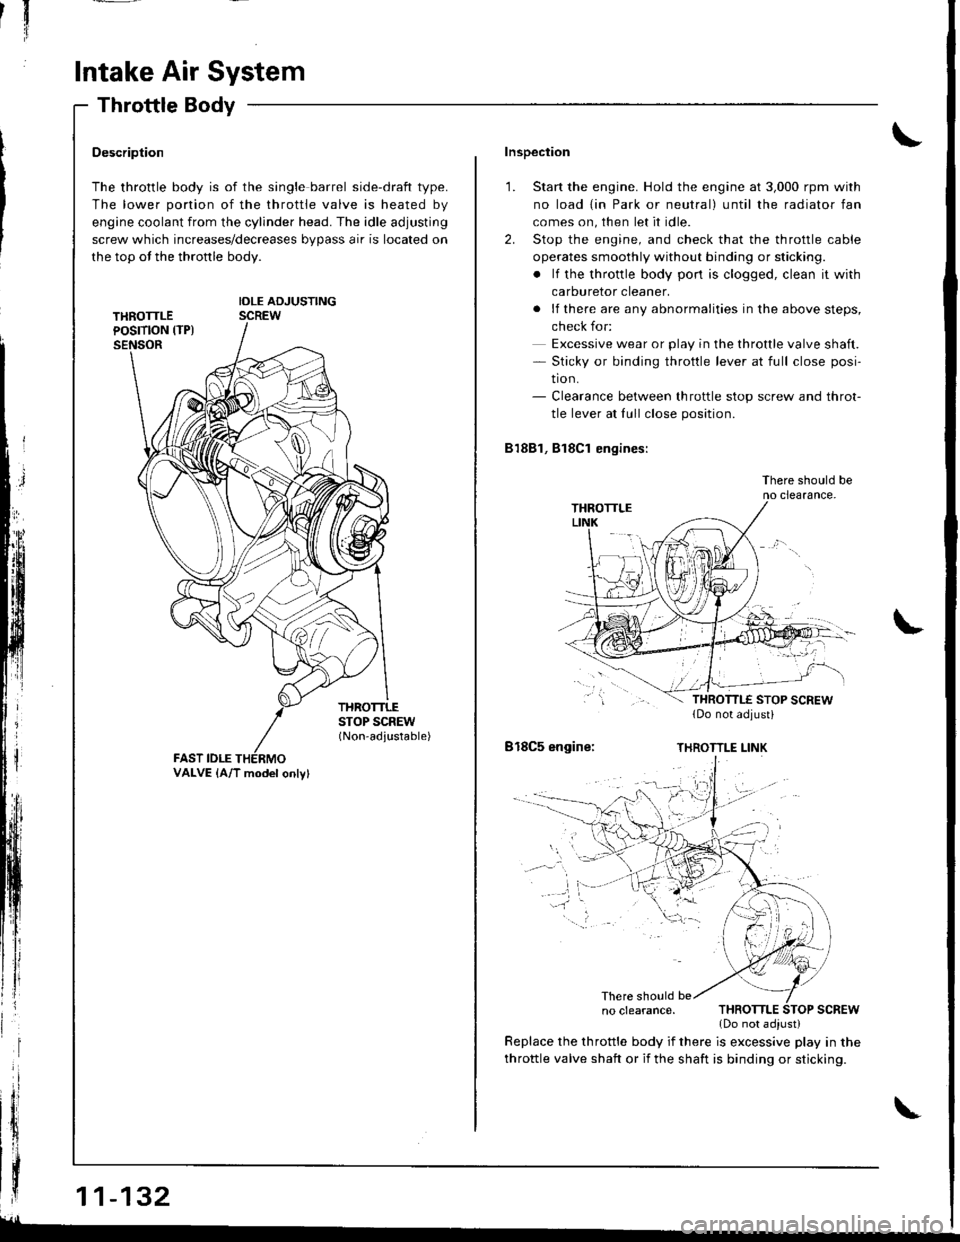 HONDA INTEGRA 1998 4.G Workshop Manual In
Intake Air System
Throttle Body
$;
Description
The throttle body is of the single barrel side-draft type.
The lower portion of the throttle valve is heated by
engine coolant from the cylinder head.